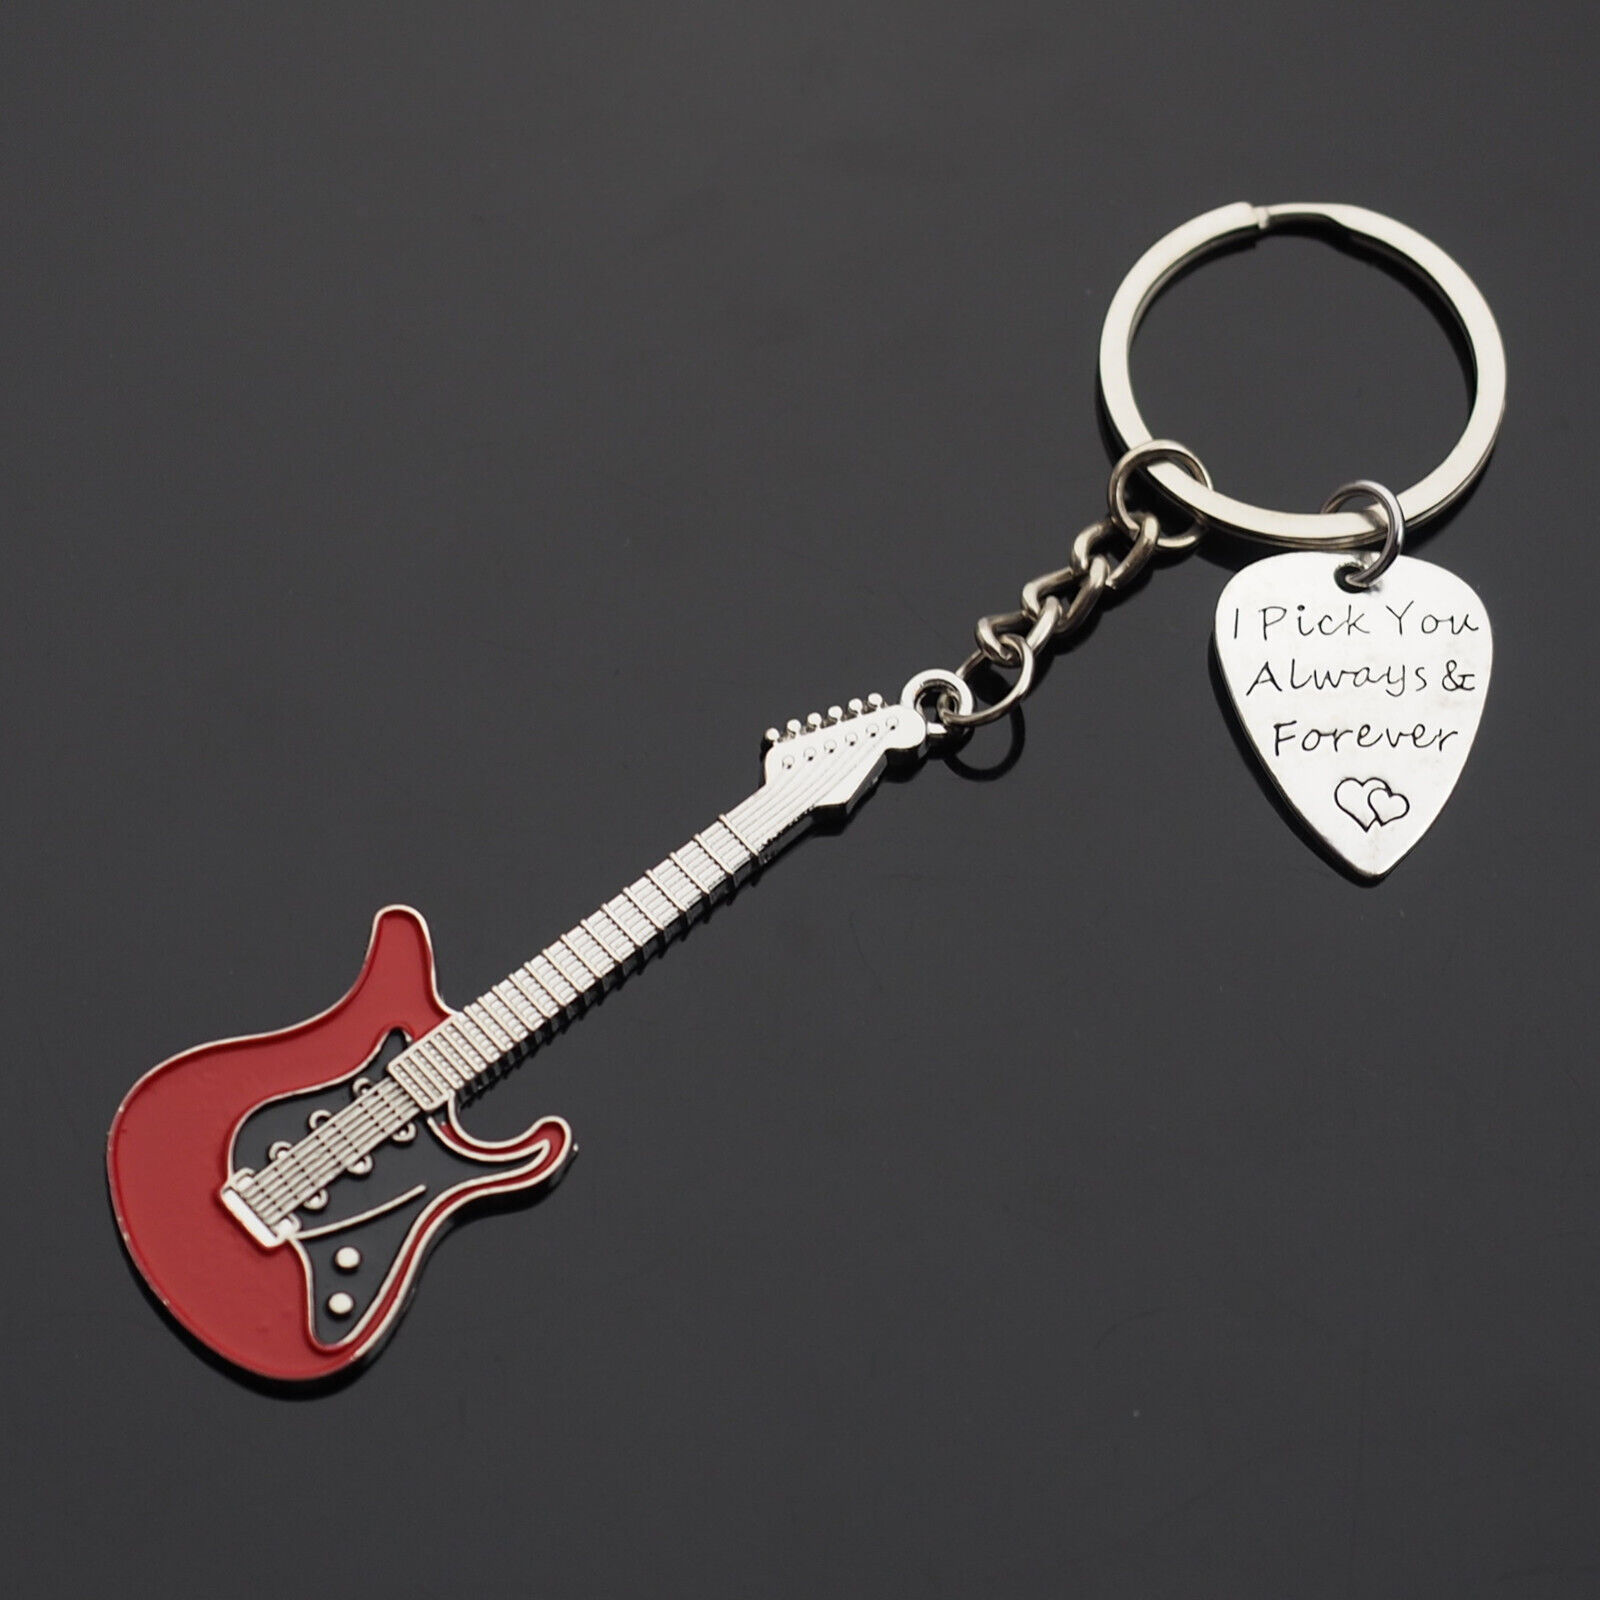 Red Guitar & Pick Keychain I Pick You Always & Forever Hearts Love Music Gift